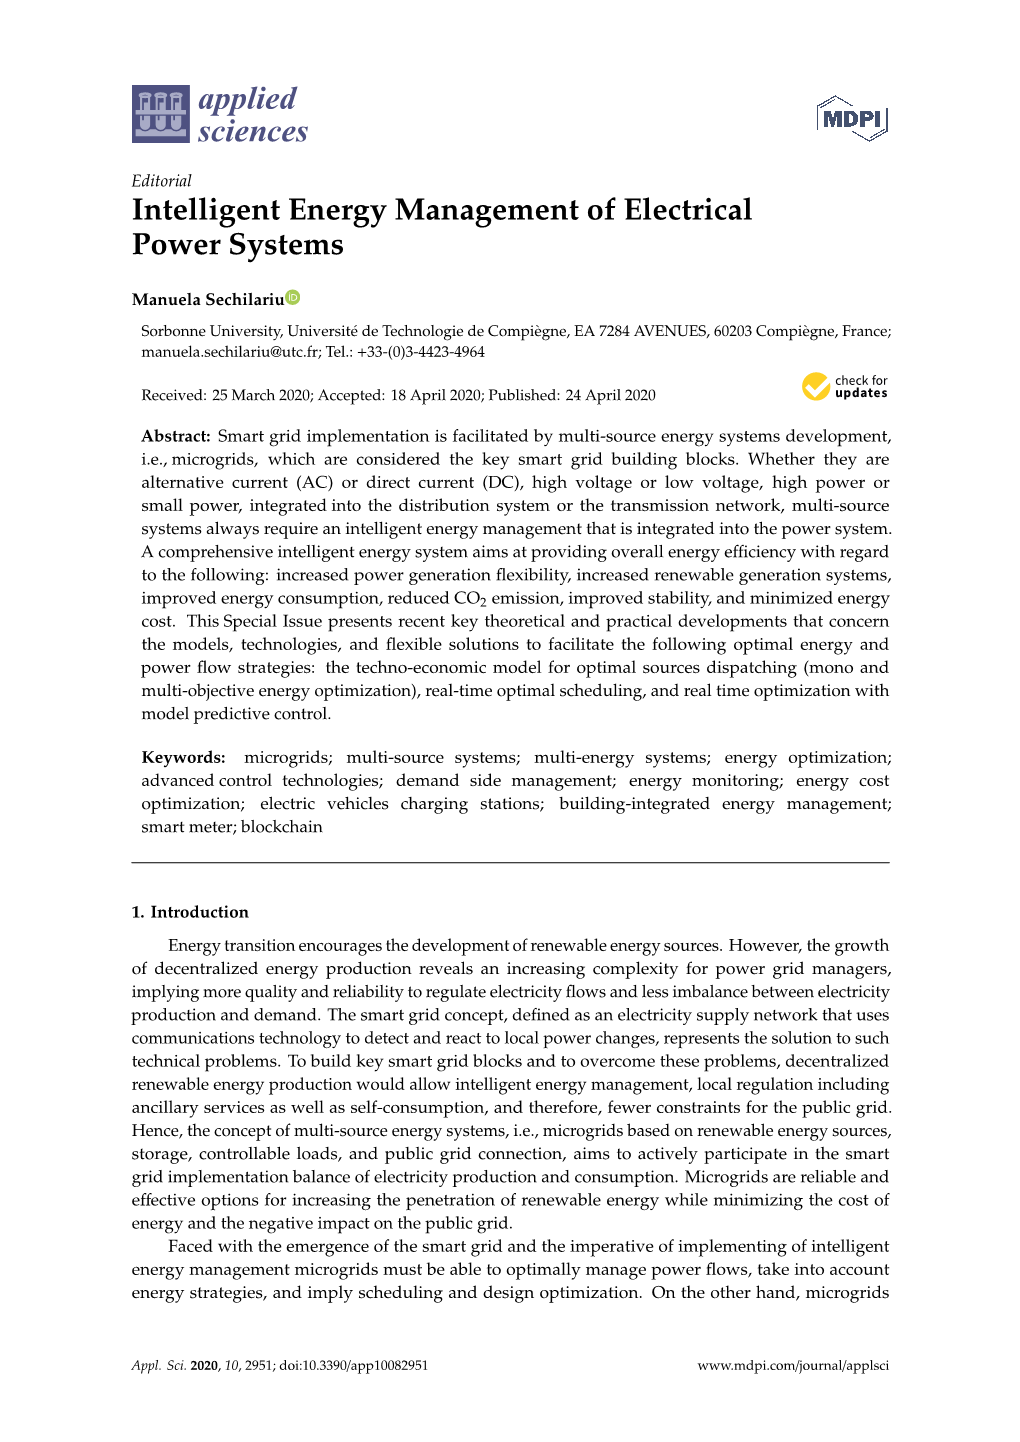 Intelligent Energy Management of Electrical Power Systems